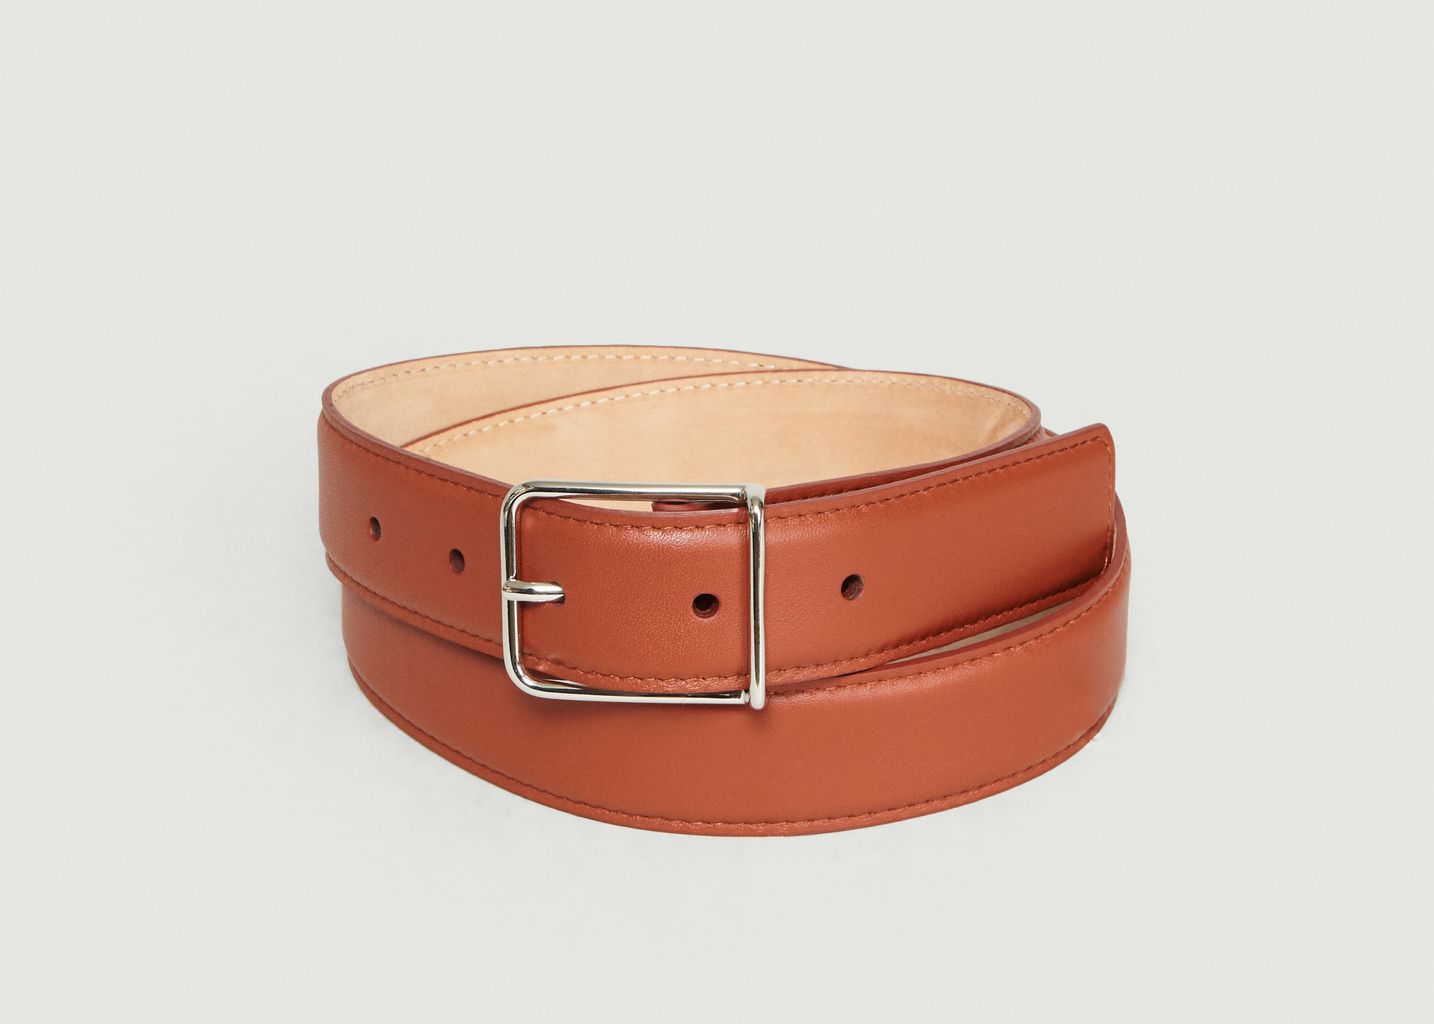 LADIES/WOMENS RED NAPPA LEATHER BELT